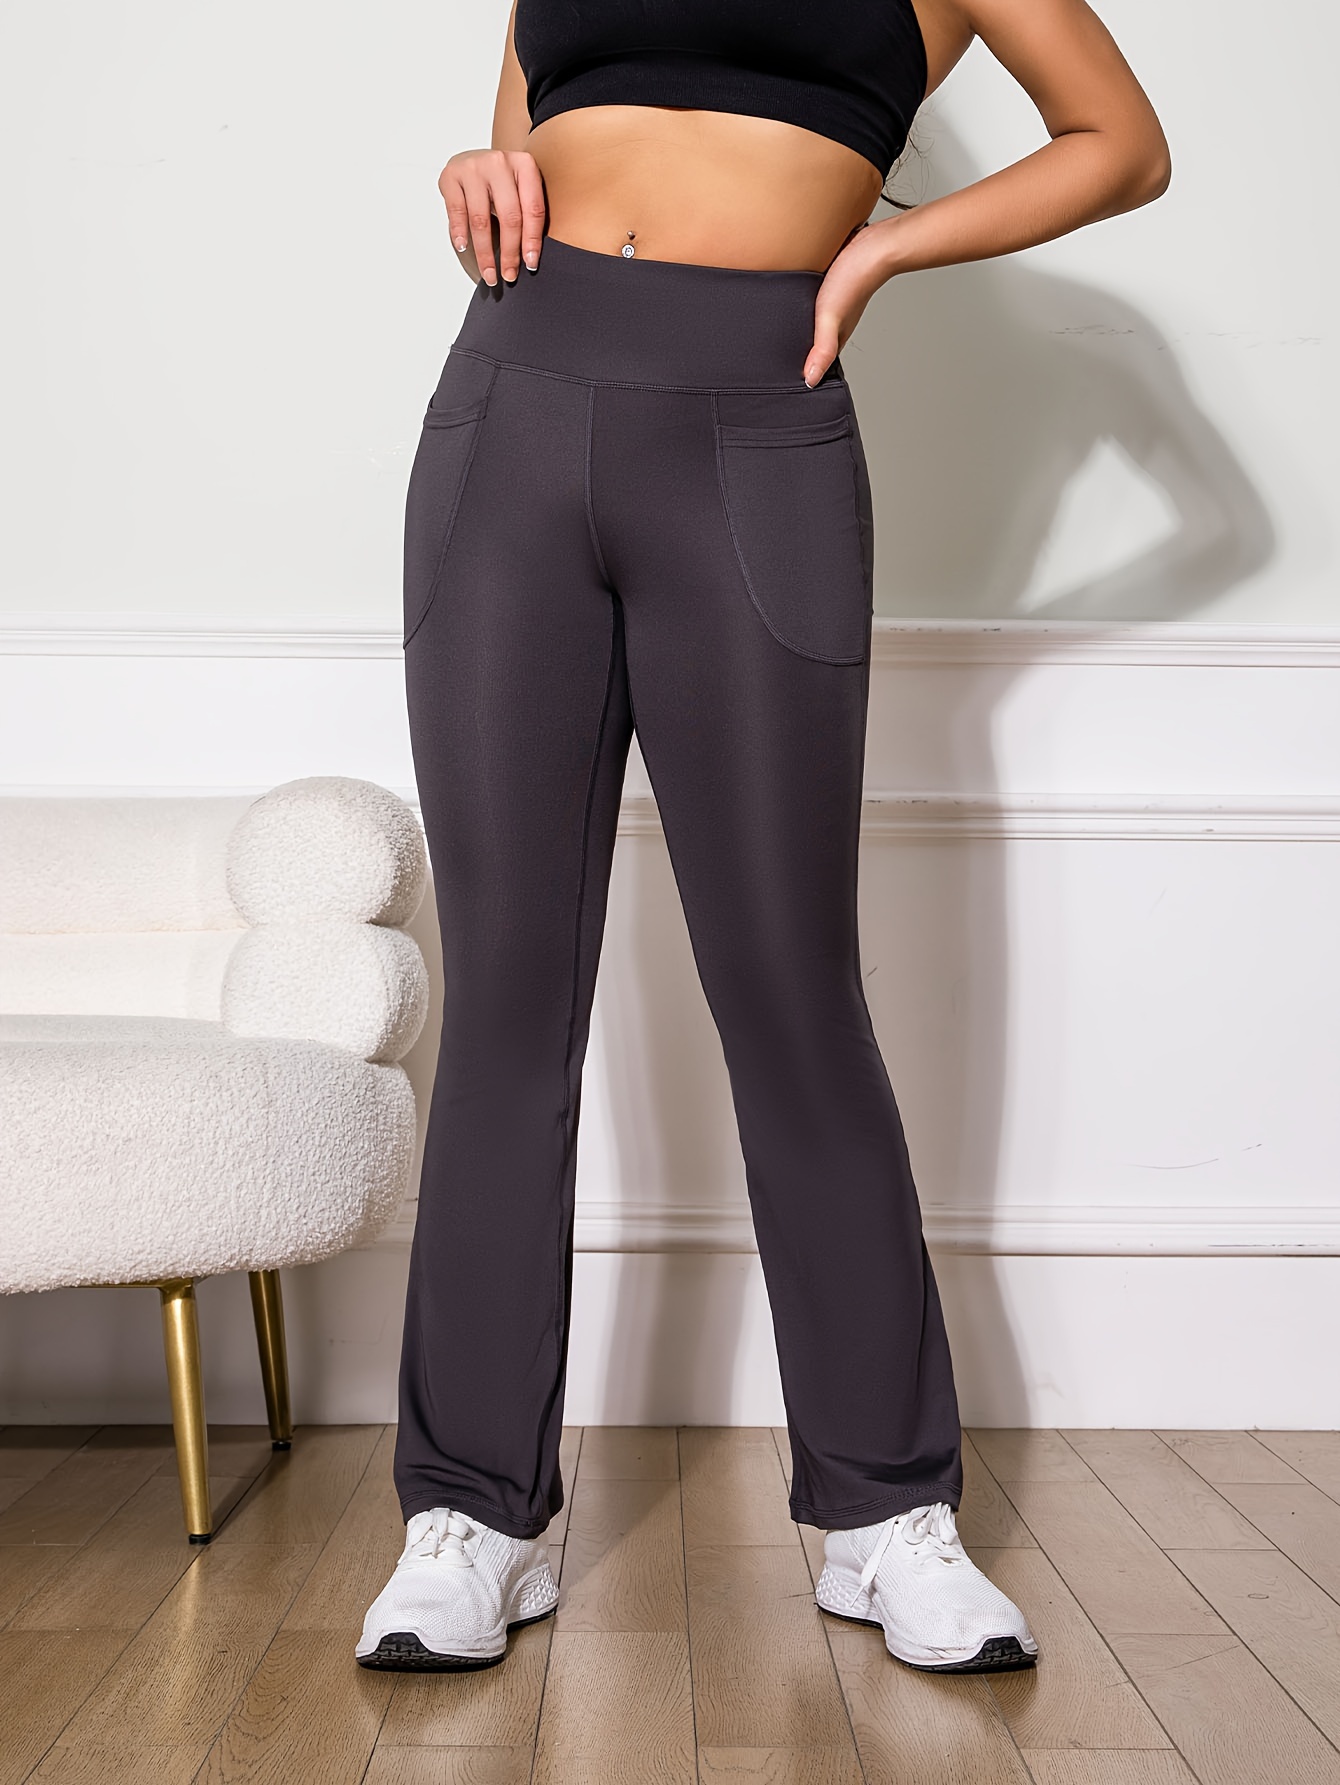 Flare Yoga Pant, with Pocket – Striped Box Boutique